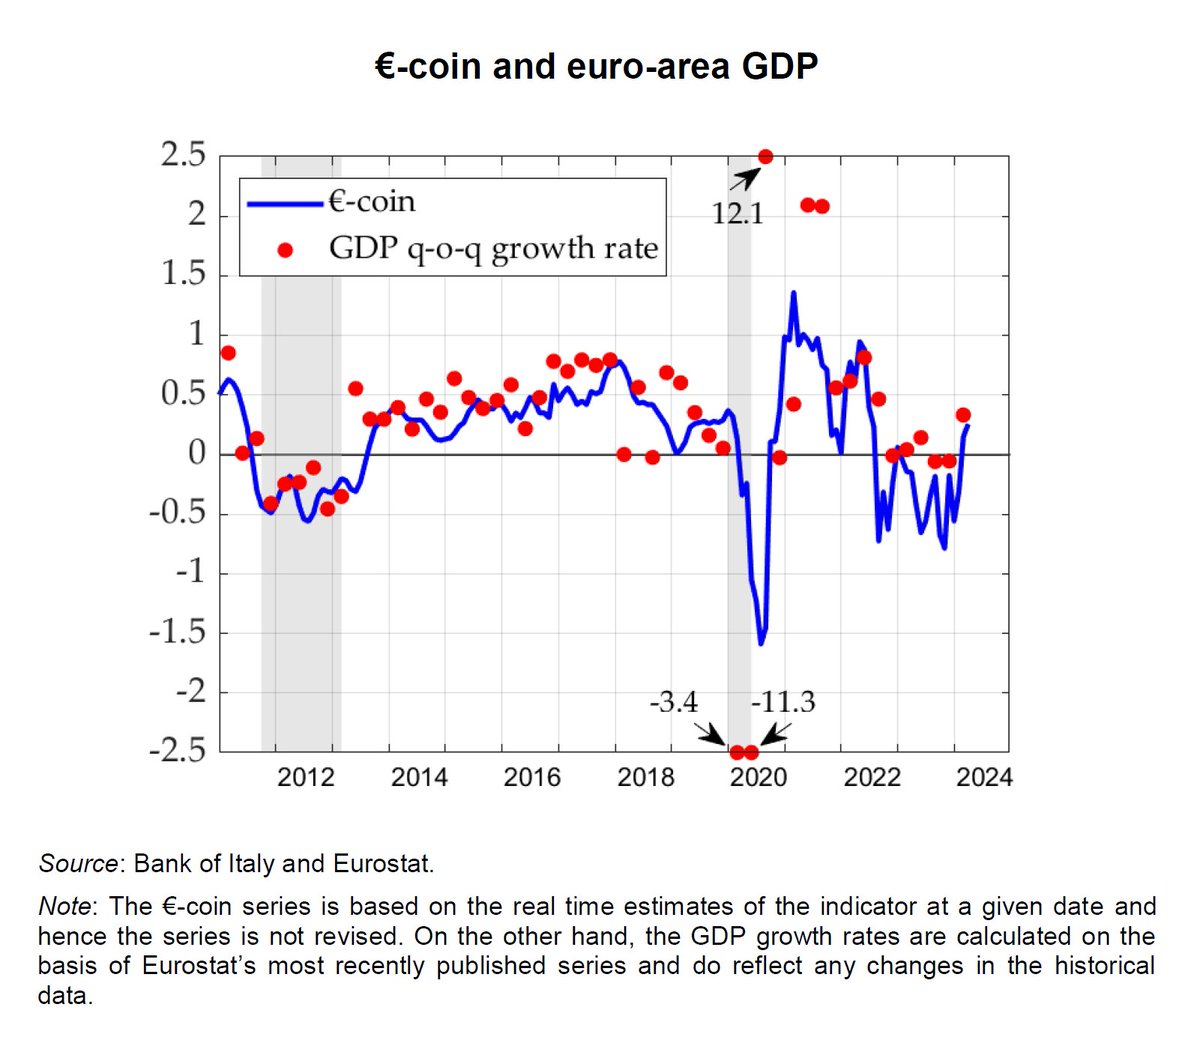 #BankOfItaly #Eurocoin rose for the third consecutive month in April (to 0.26, from 0.15 in March), signalling a pick-up in economic activity in the #EuroArea.
The indicator benefited from a cyclical recovery in industrial production and from the resilience of demand indicators,…